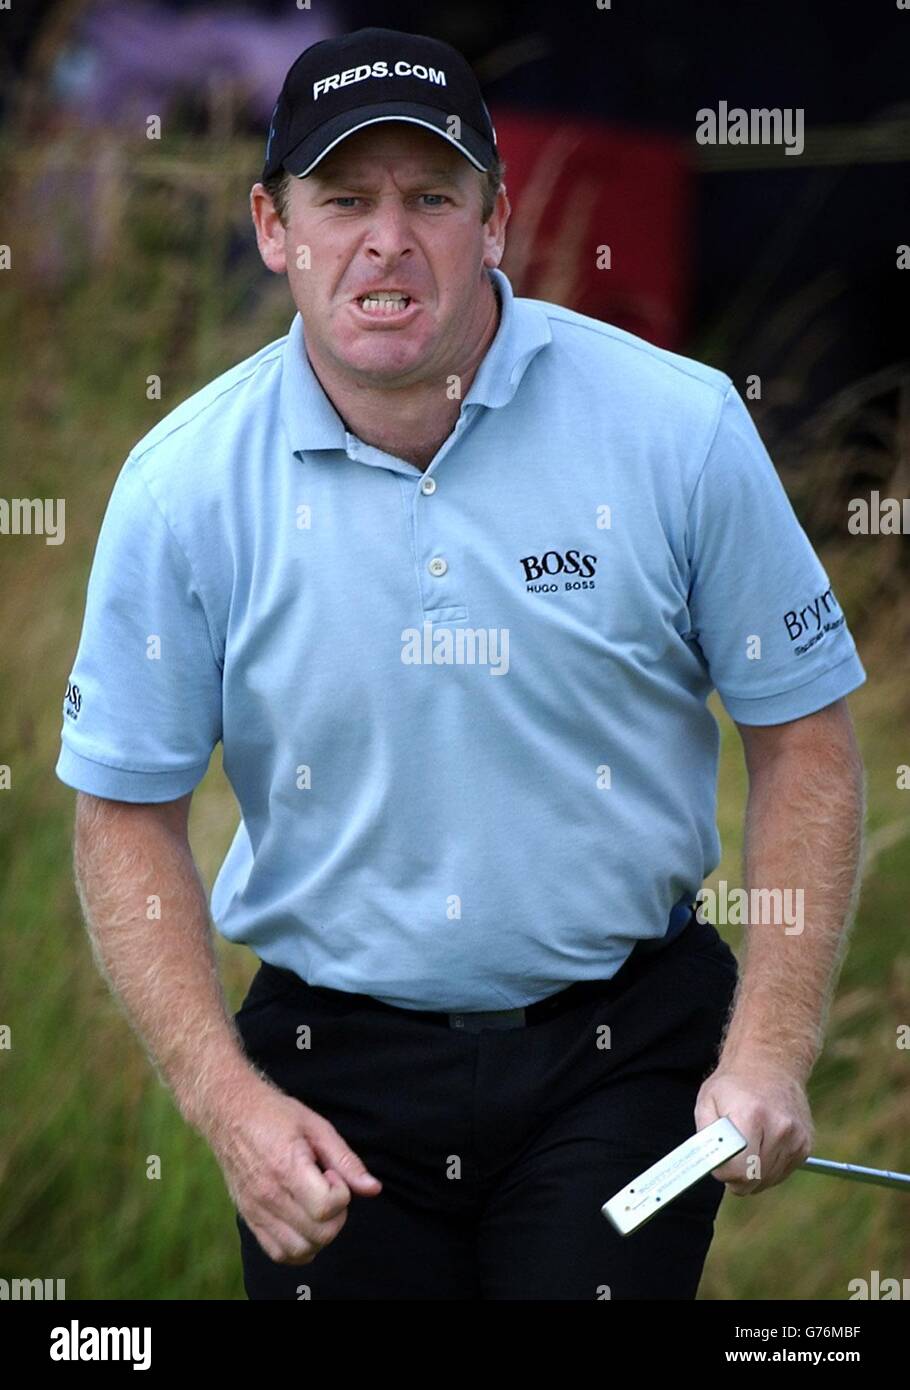 Gary Evans celebrates making a par putt after losing his ball on the 17th hole, during the final day of the 131st Open Championship at Muirfield, Scotland. Stock Photo